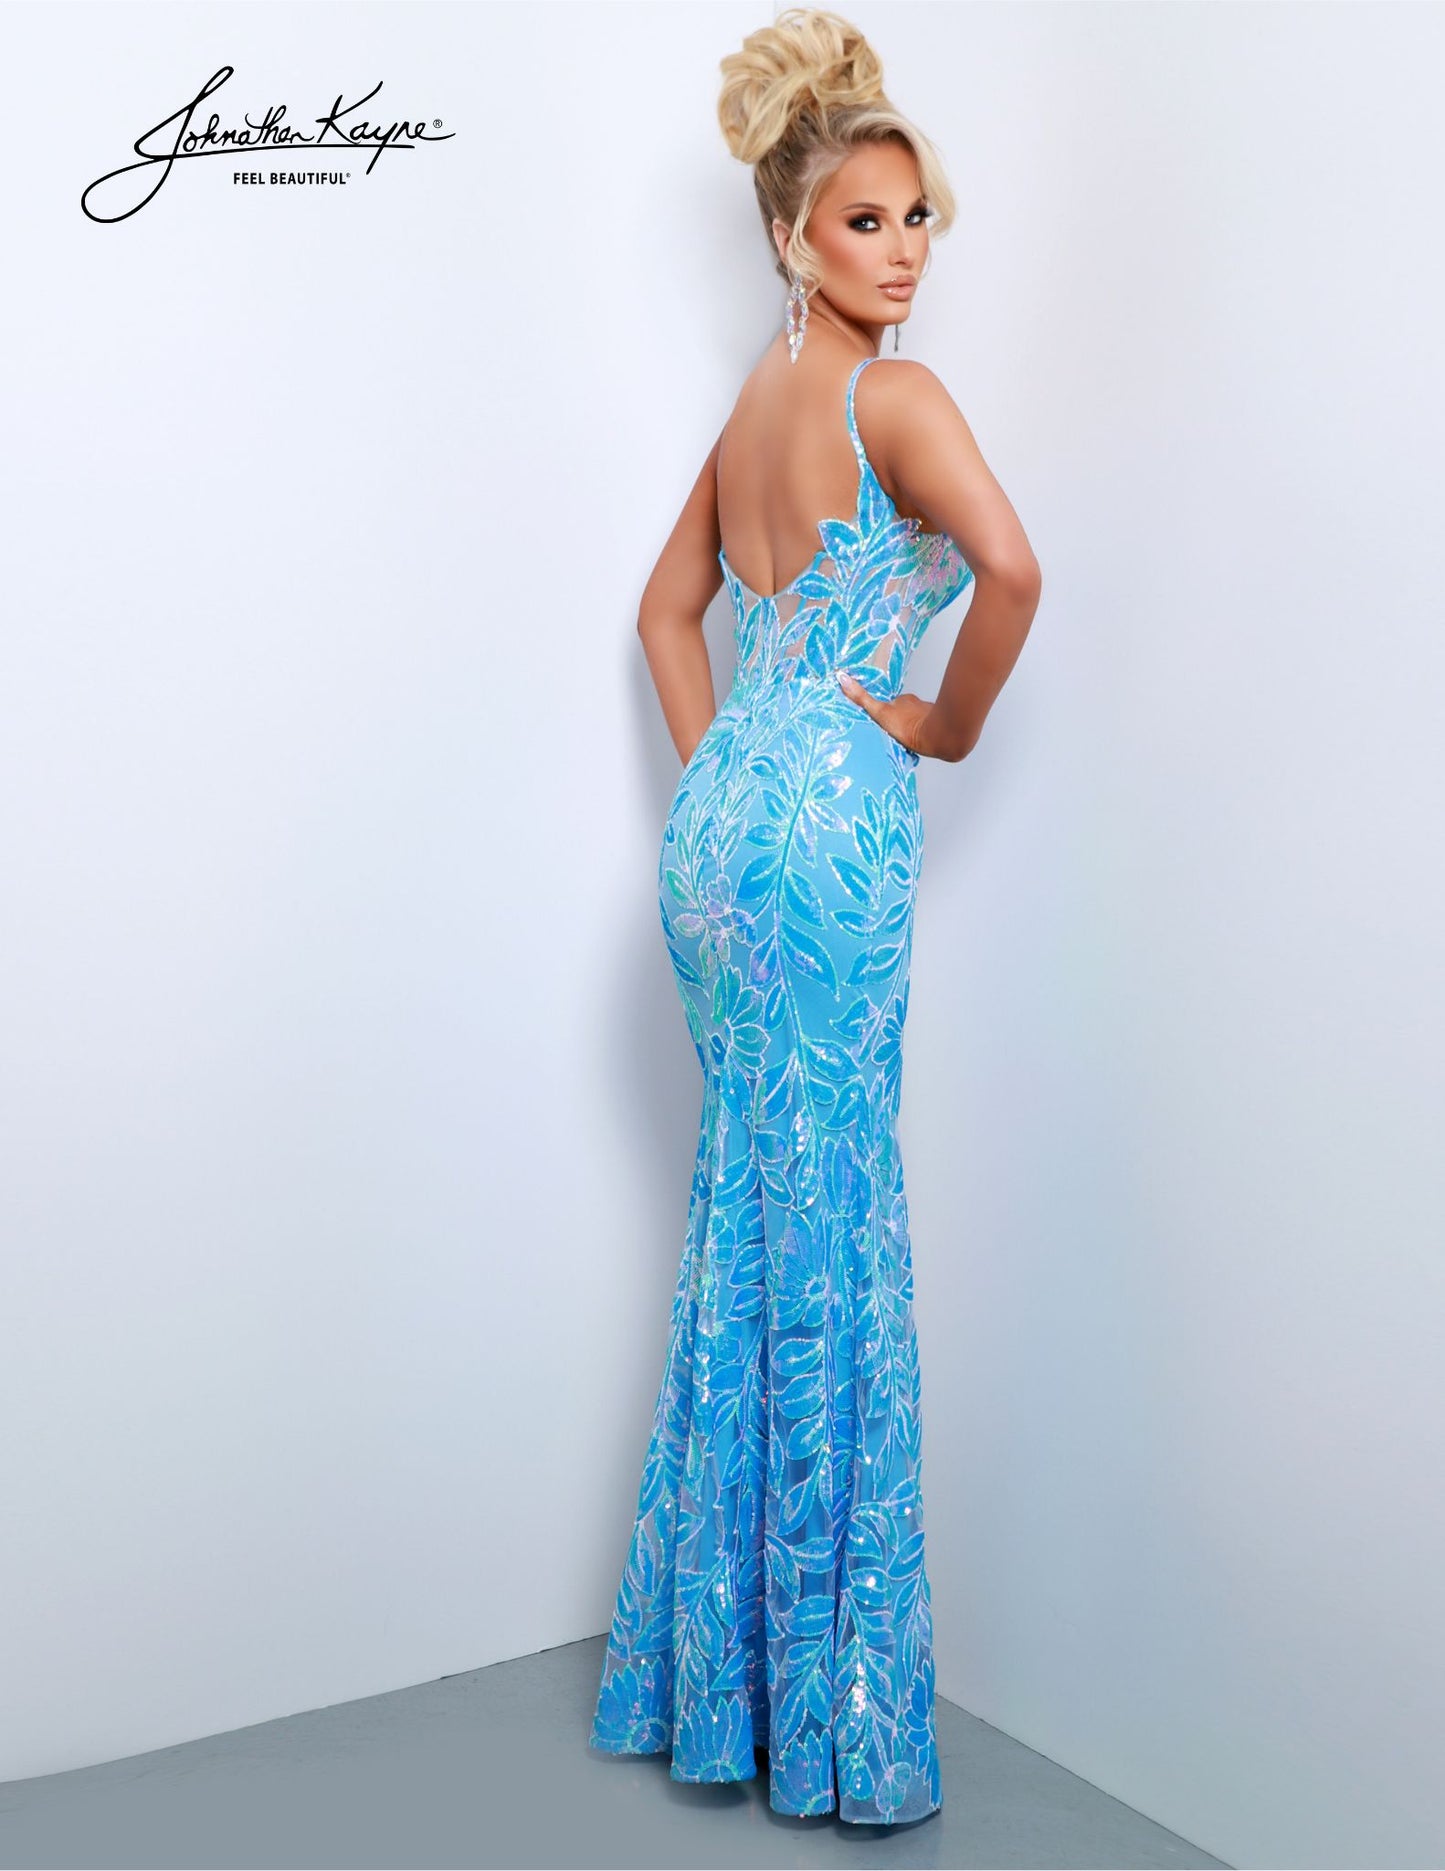 This glamorous Johnathan Kayne 2837 gown will make you sparkle on your special occasion. Featuring a mesh corset, sequined bodice and a sheer overlay with a high-slit, this glamorous formal gown is sure to turn heads. Perfect for pageant or prom events. Dress to mesmerize in our Sequin Mesh gown, a testament to bold flair. The exposed boning and sheer bodice add drama, while the thigh-high slit ensures you're the center of attention.